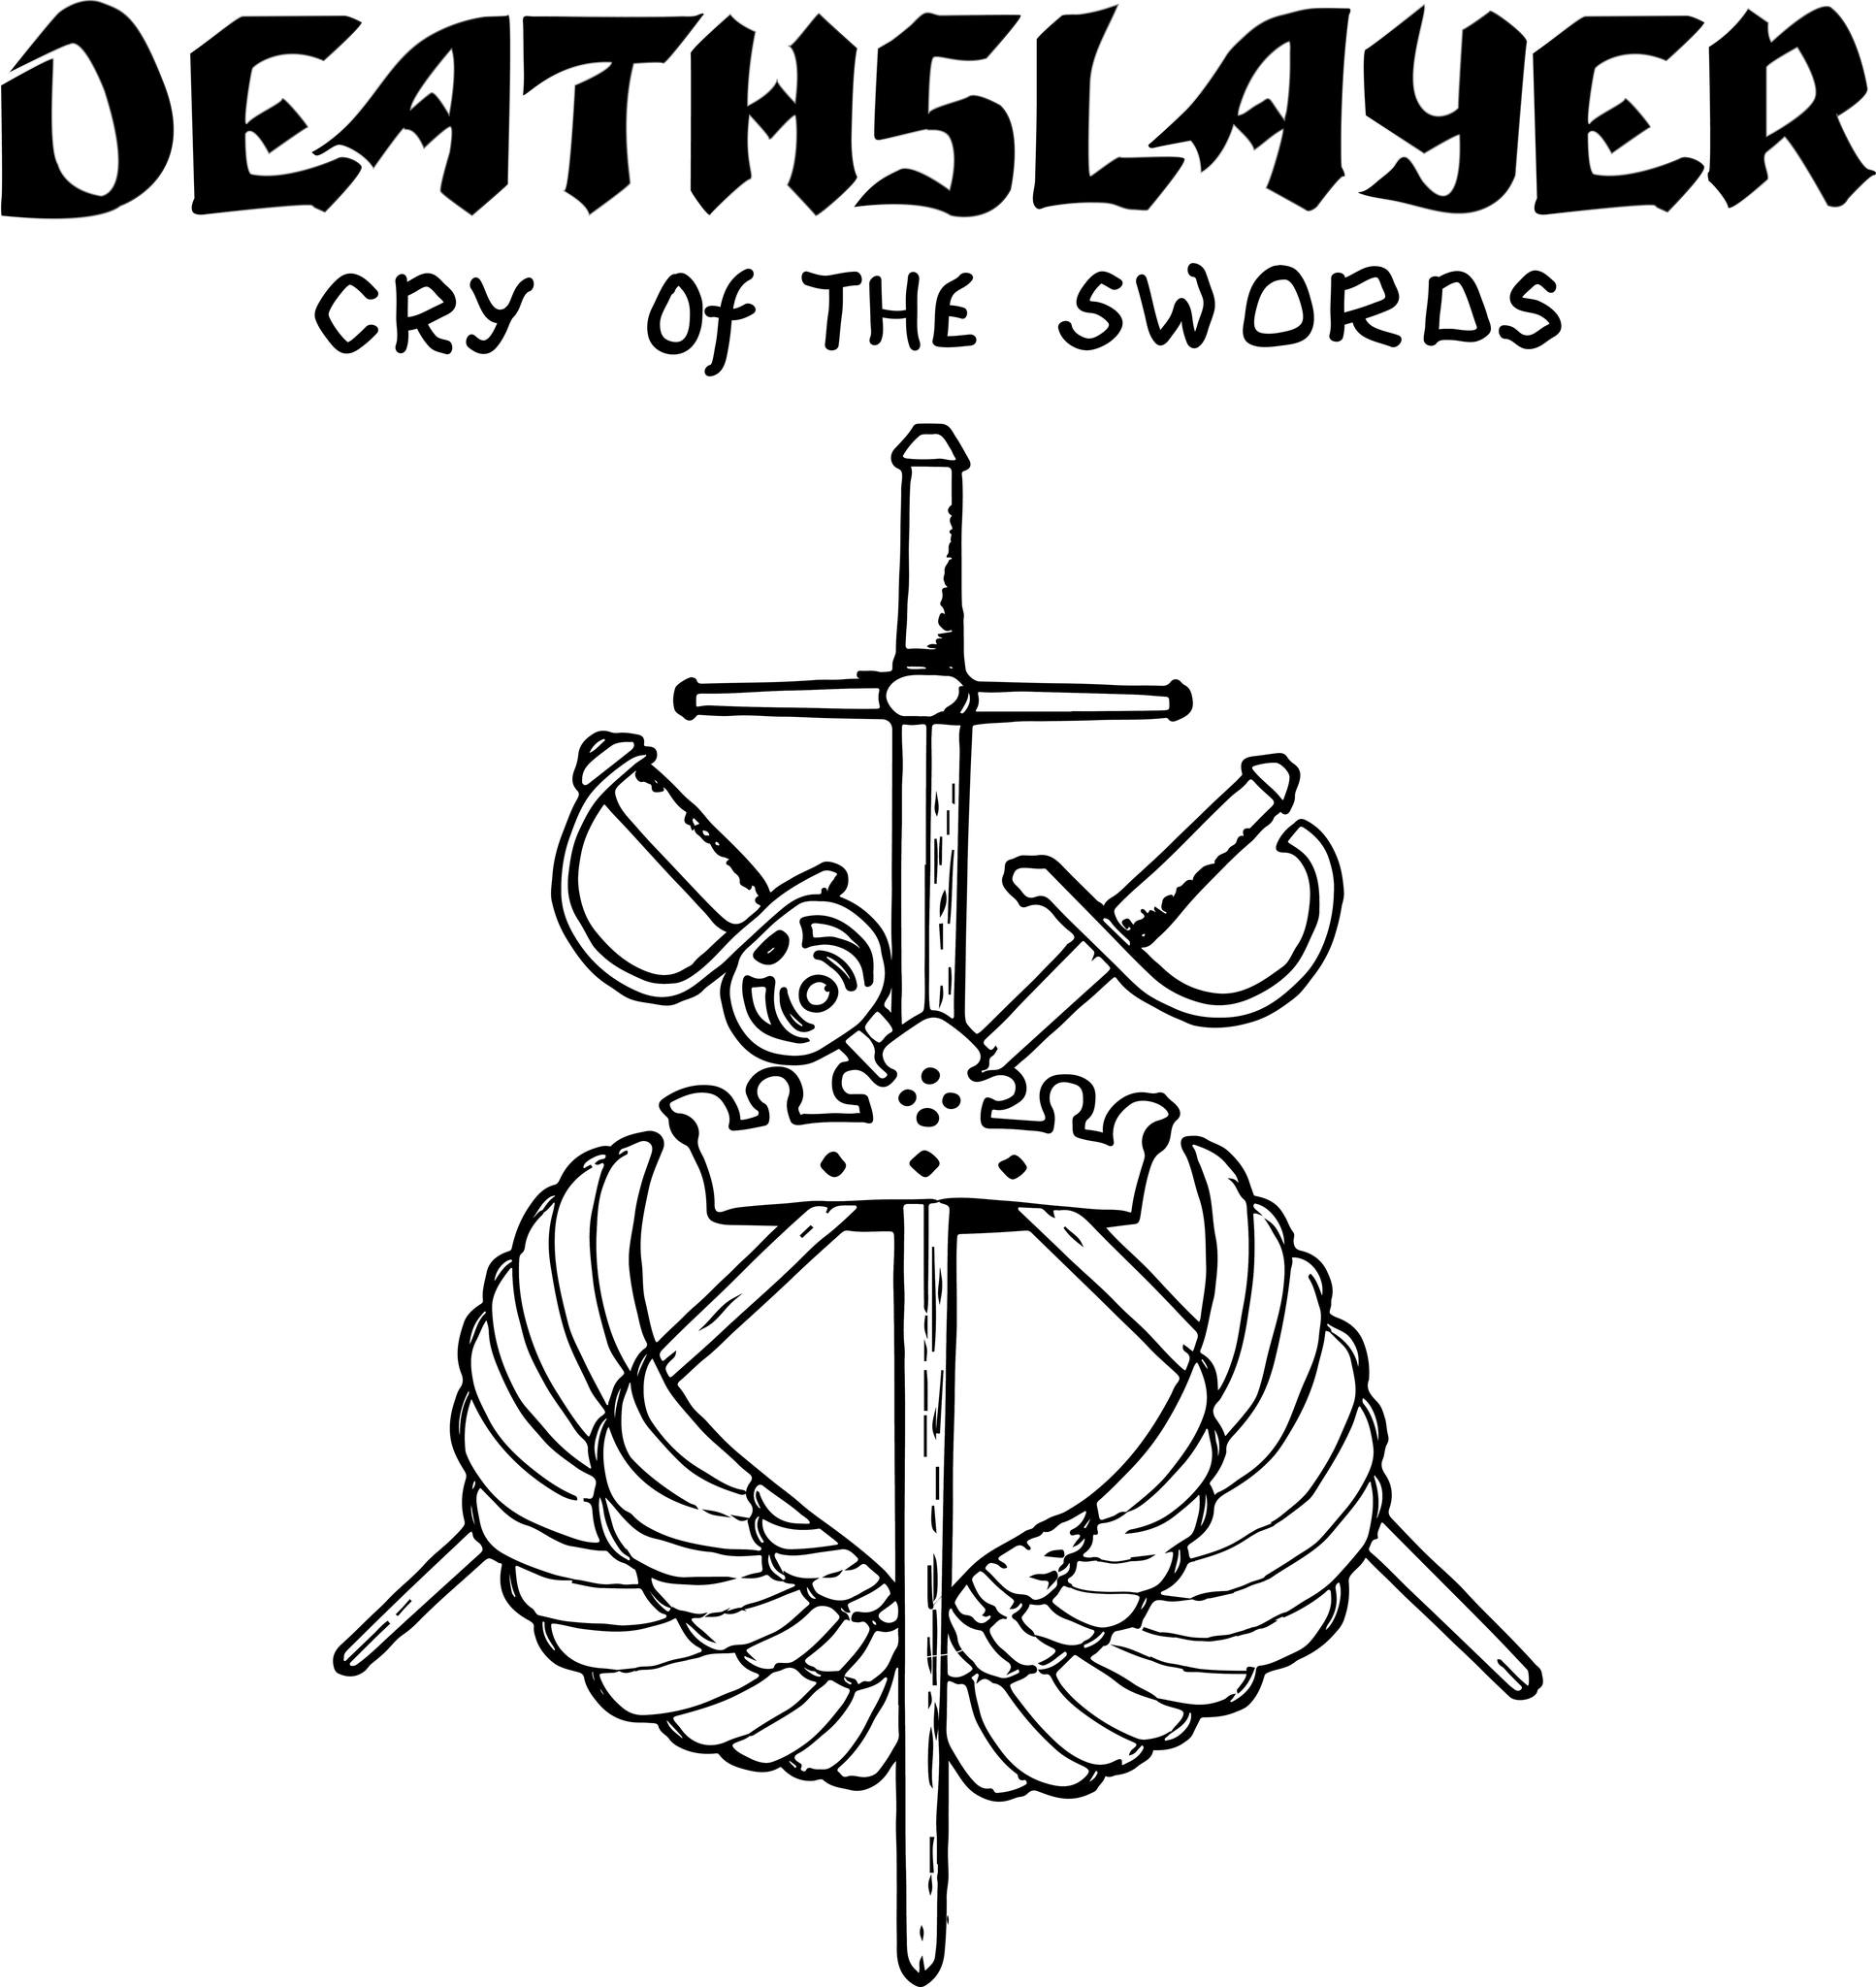 DEATHSLAYER / Cry of the Swords